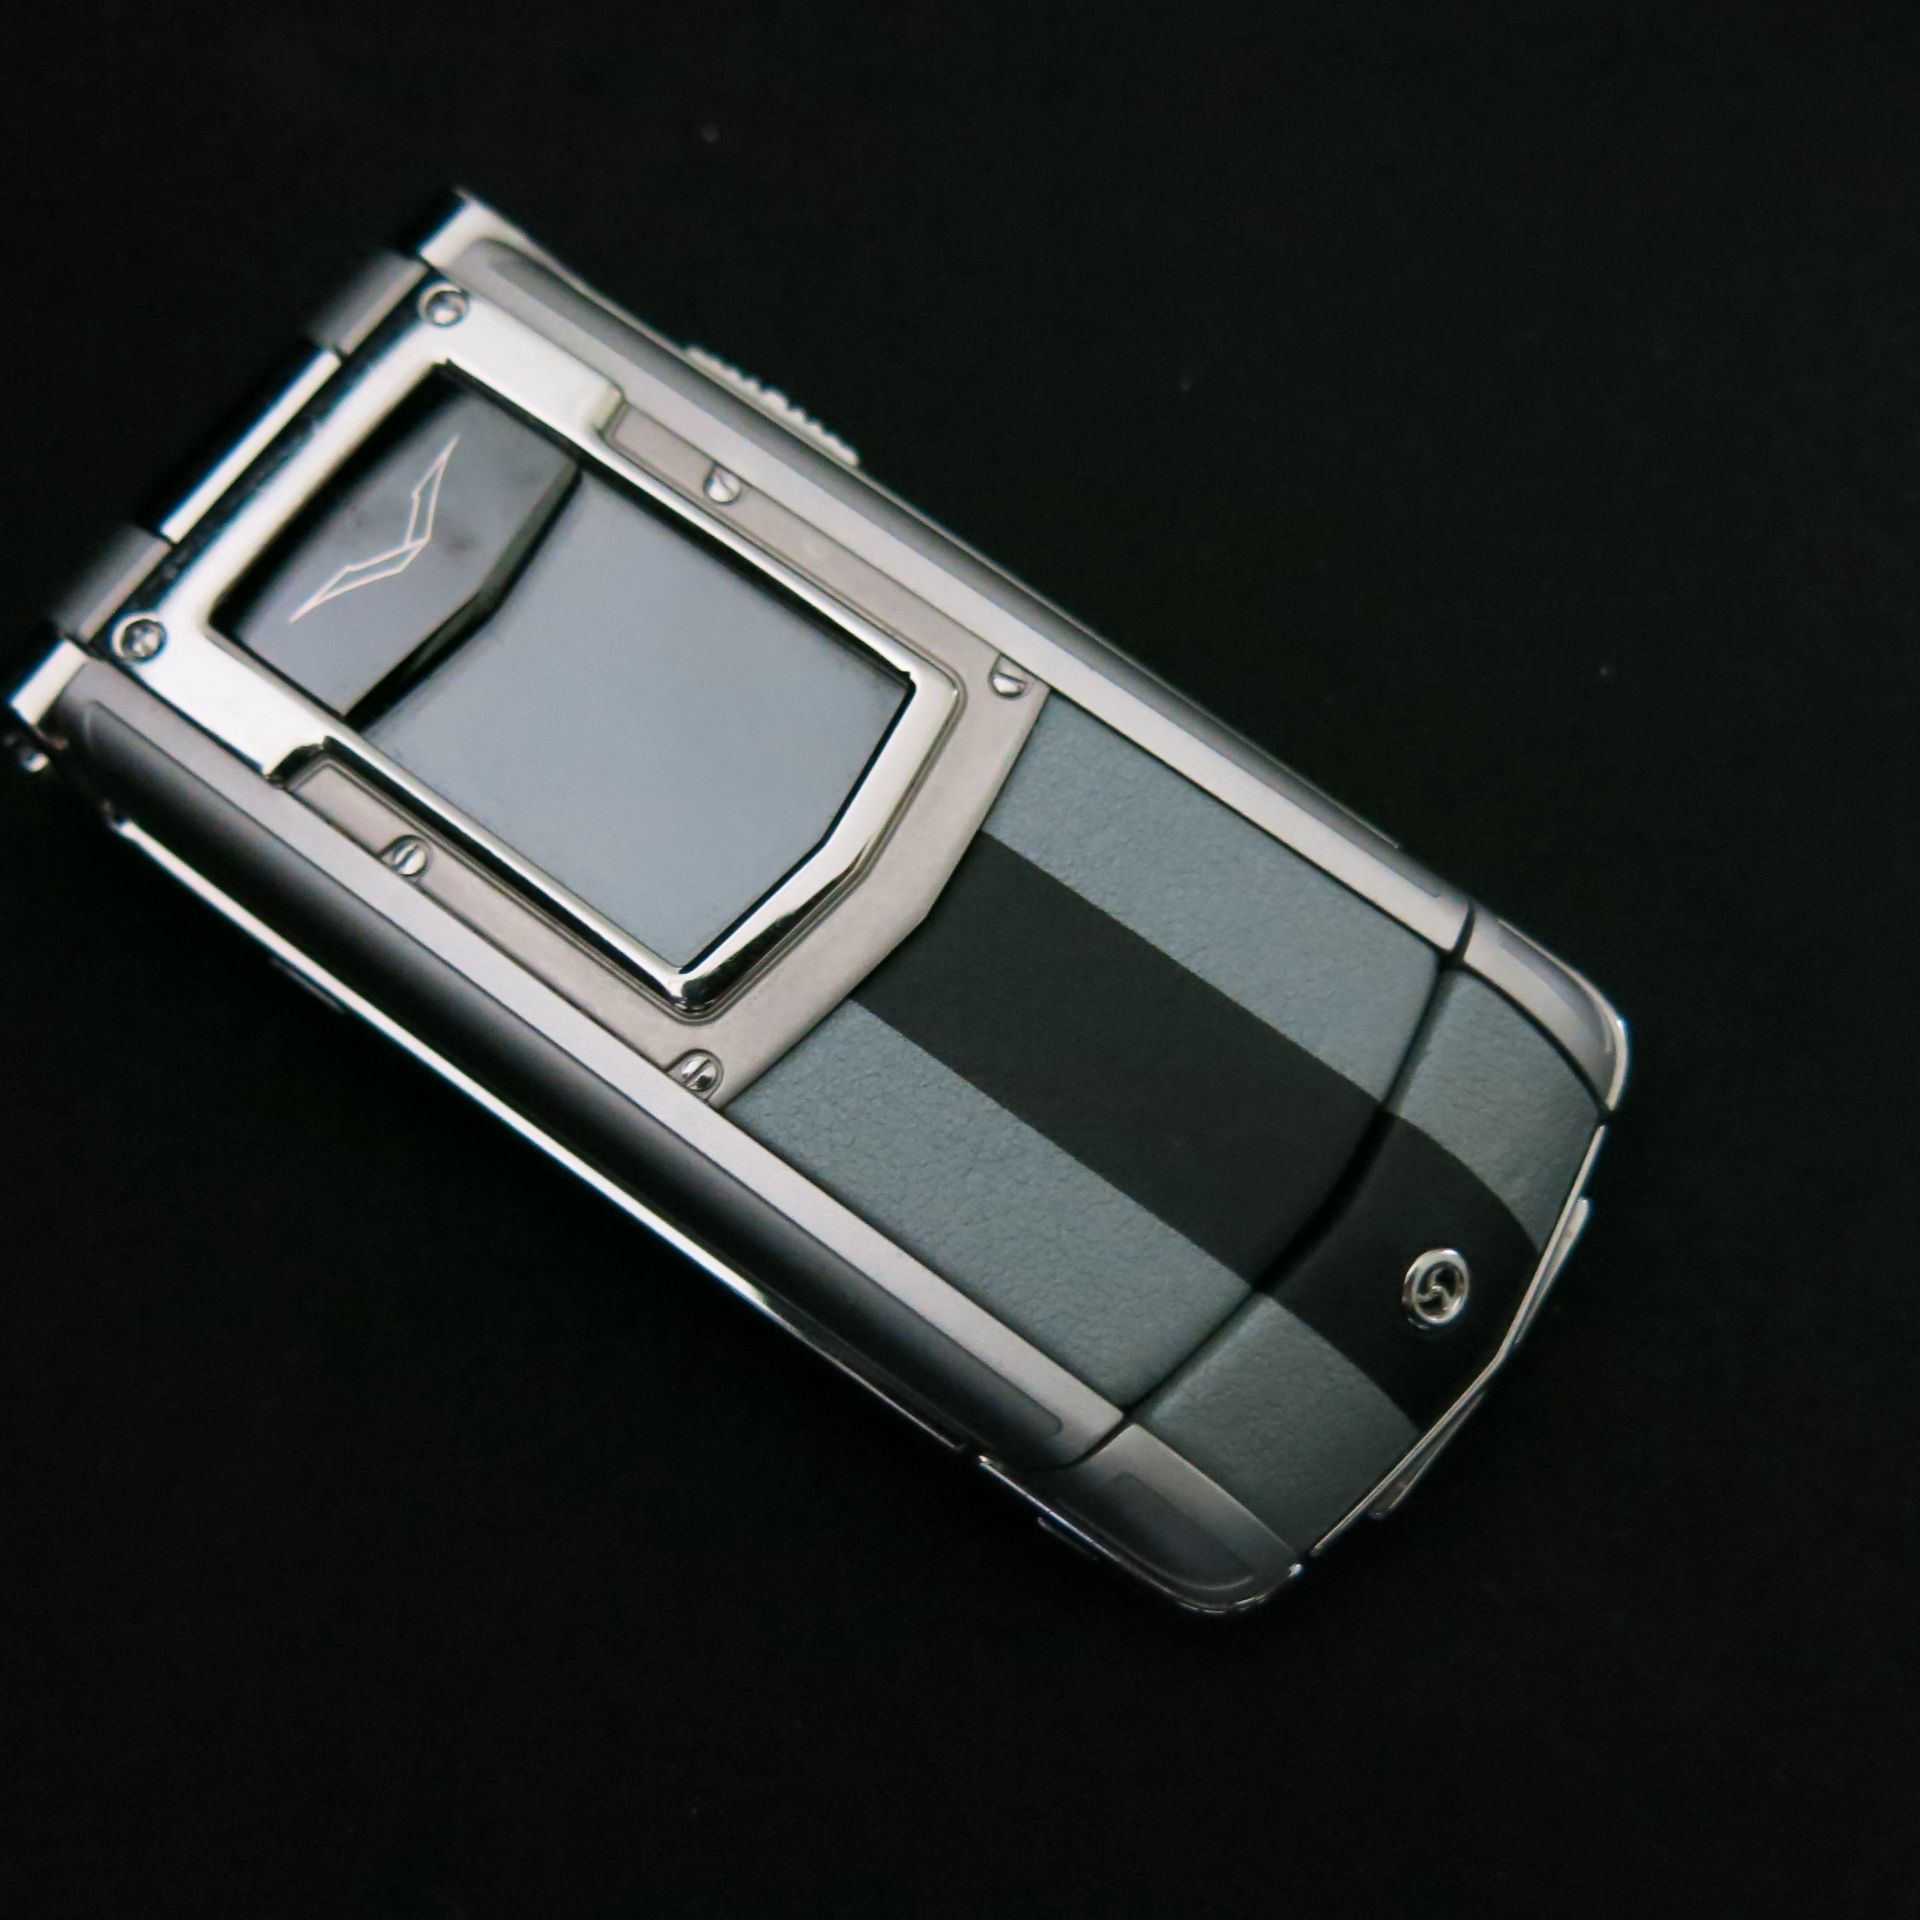 Entire Contents of the VERTU Museum Collection to Include: 105 Various Iconic Phones & Appearance - Image 66 of 106